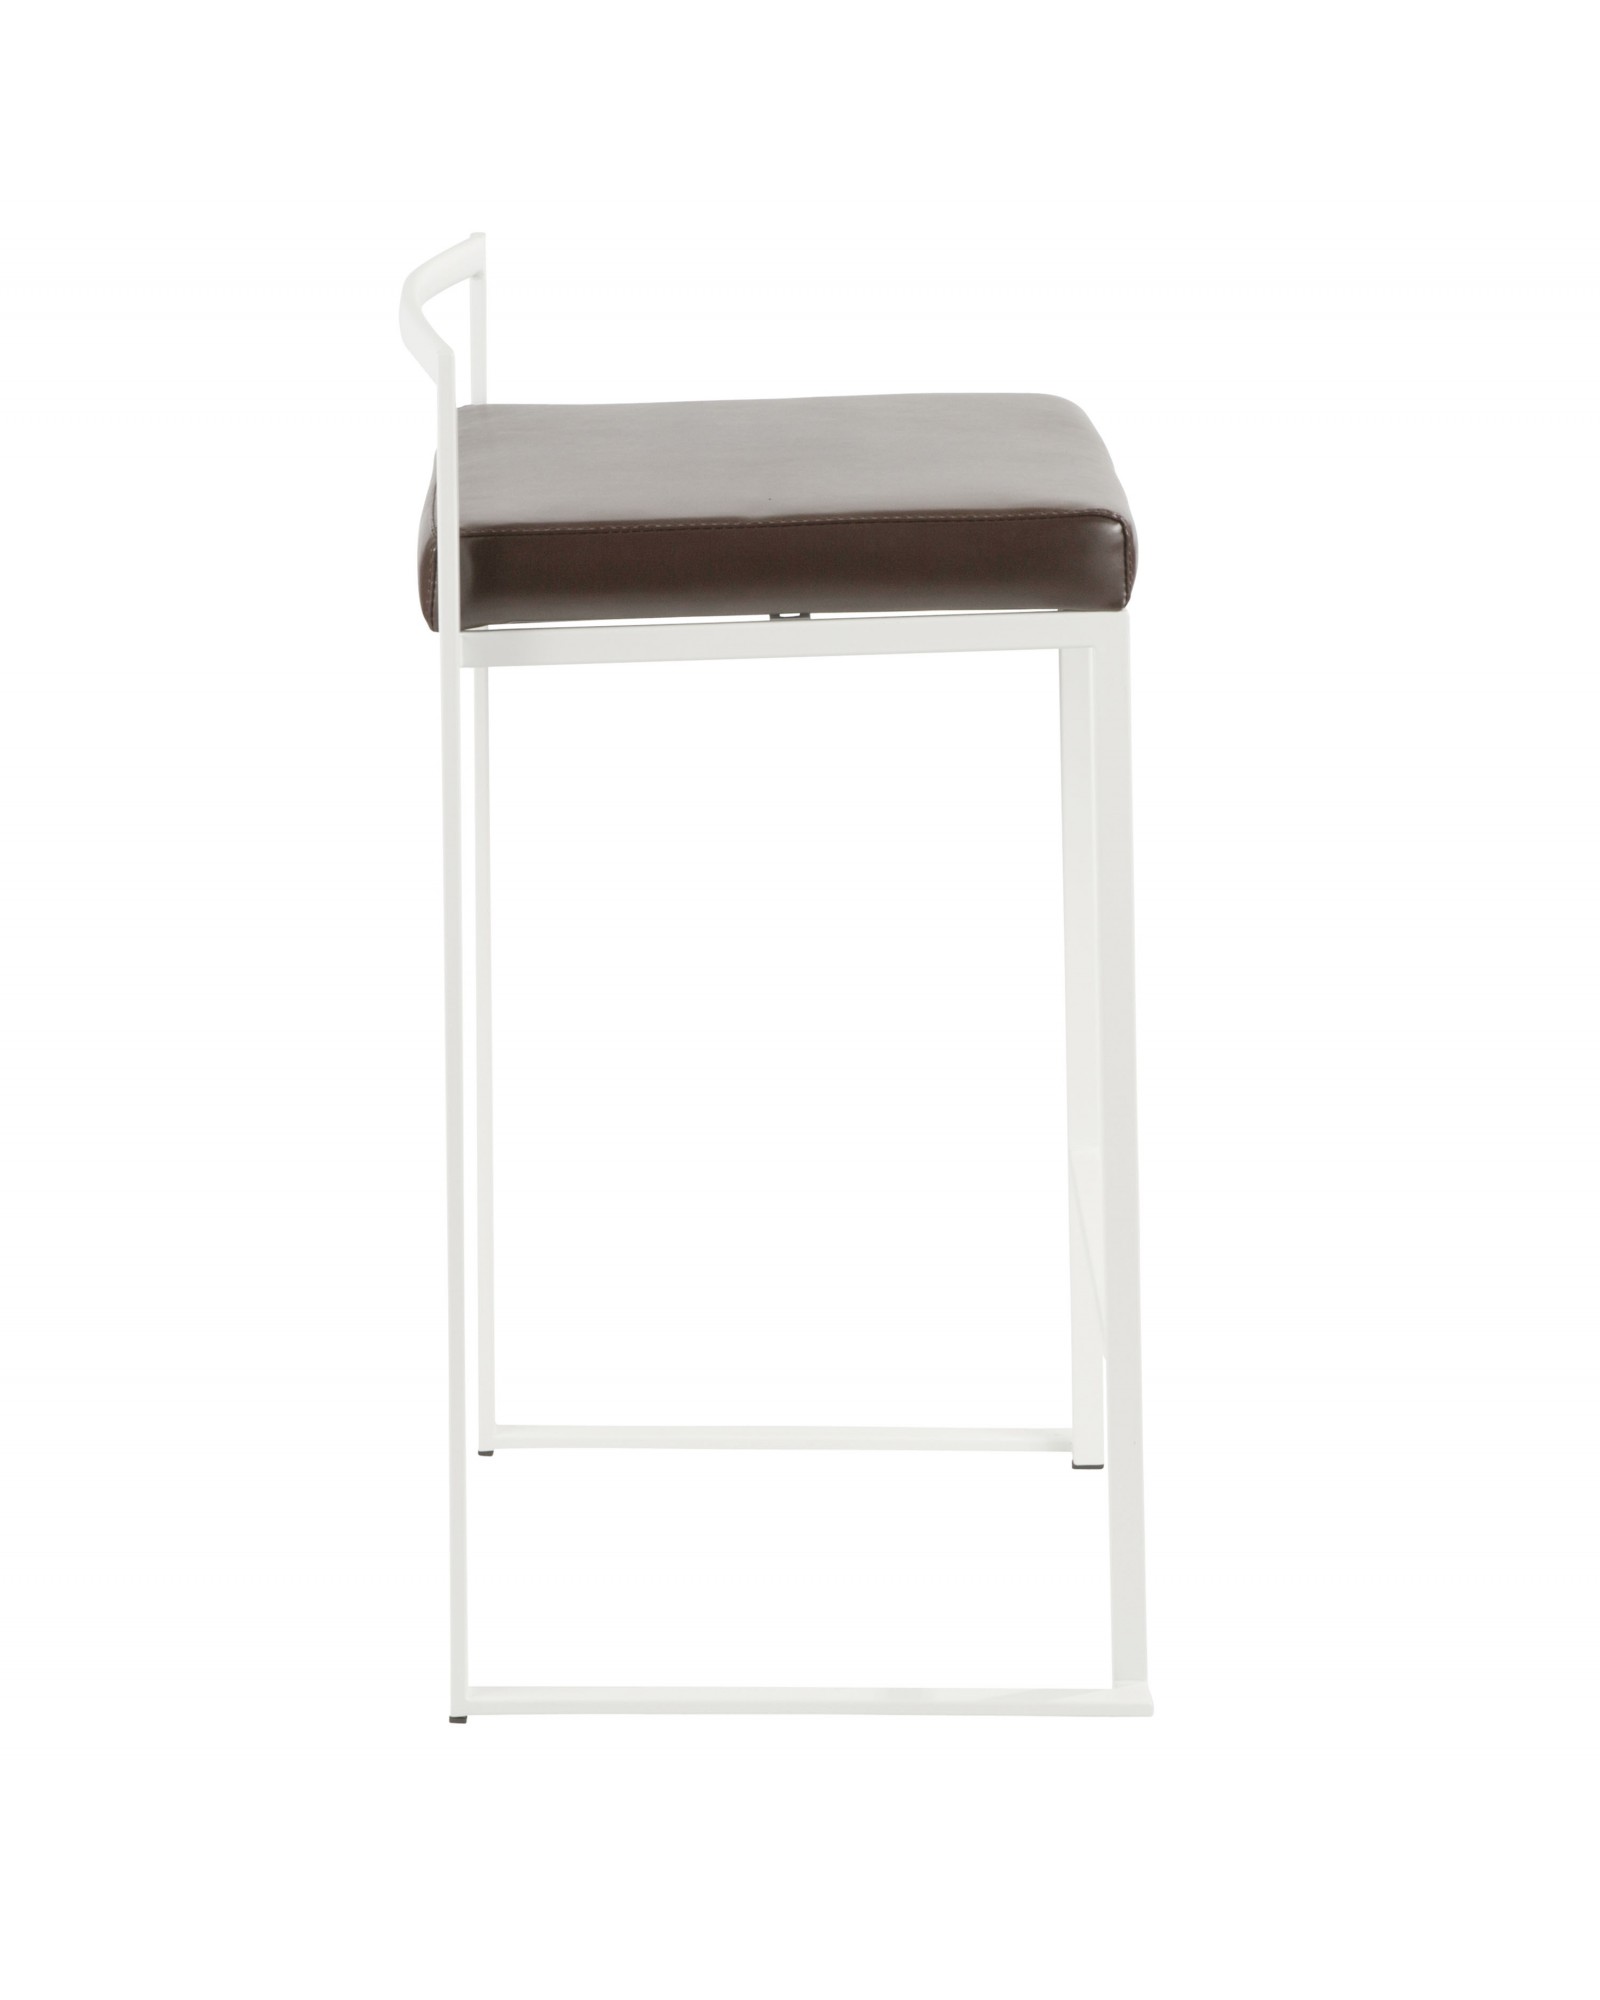 Fuji Contemporary Stackable Counter Stool in White with Brown Faux Leather Cushion - Set of 2